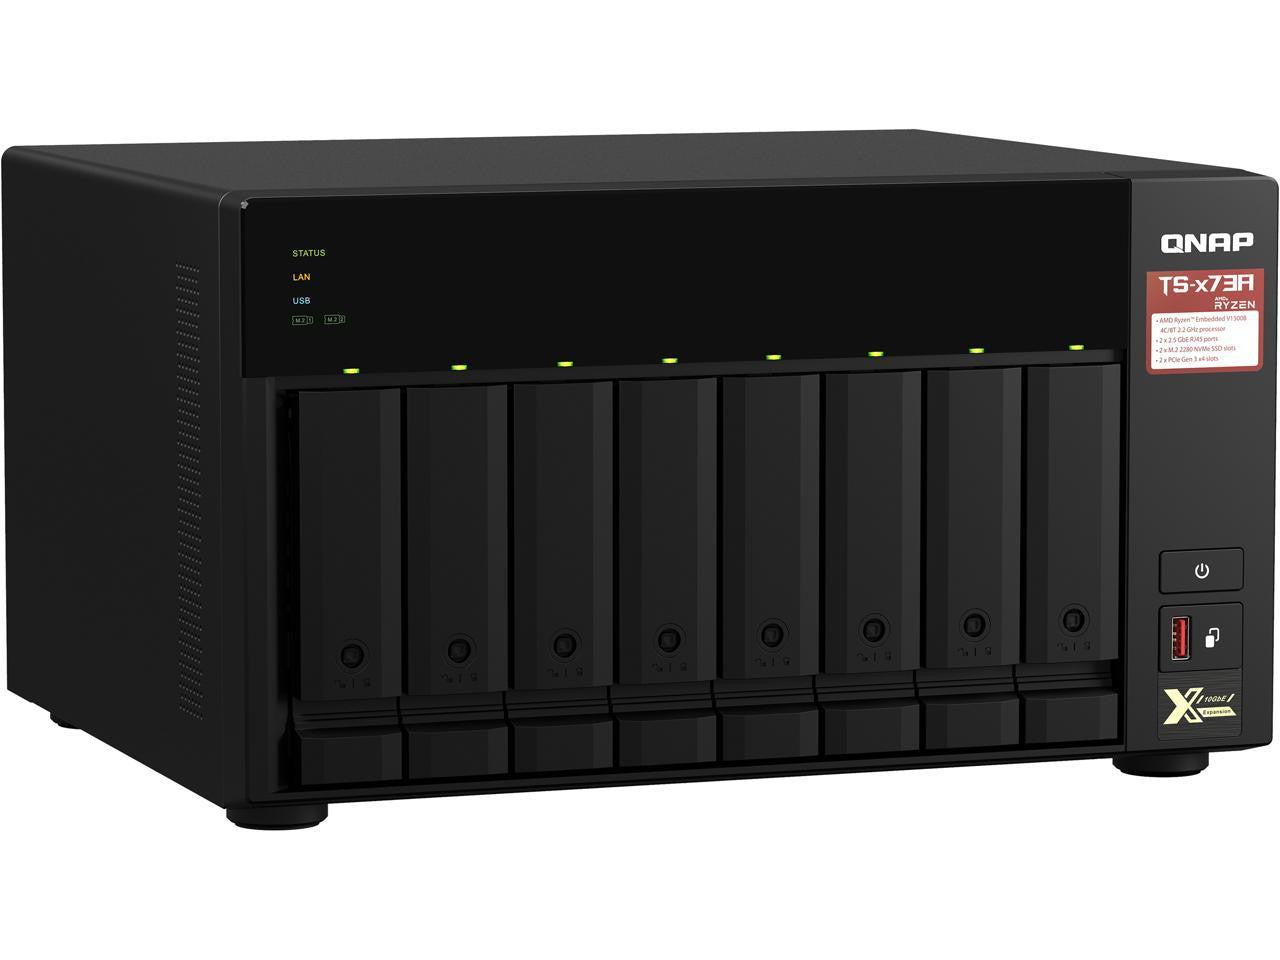 QNAP TS-873A 8-BAY NAS with 32GB DDR4 RAM and 16TB (8x2TB) Seagate Ironwolf NAS Drives Fully Assembled and Tested